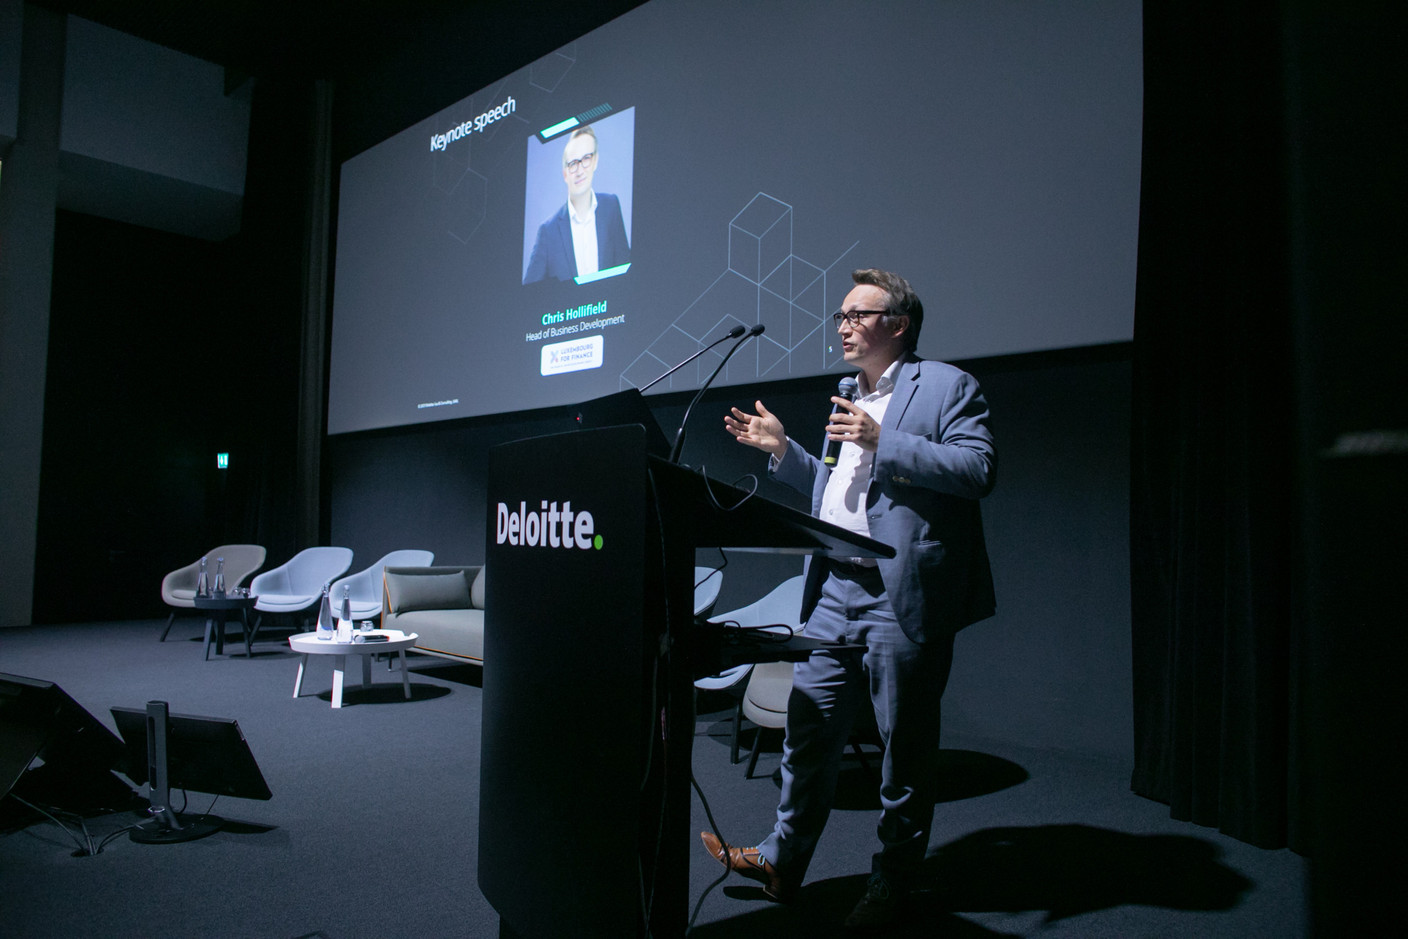 Chris Hollifield of Luxembourg for Finance is seen speaking during Deloitte’s digital assets conference, 20 April 2023. Photo: Matic Zorman / Maison Moderne